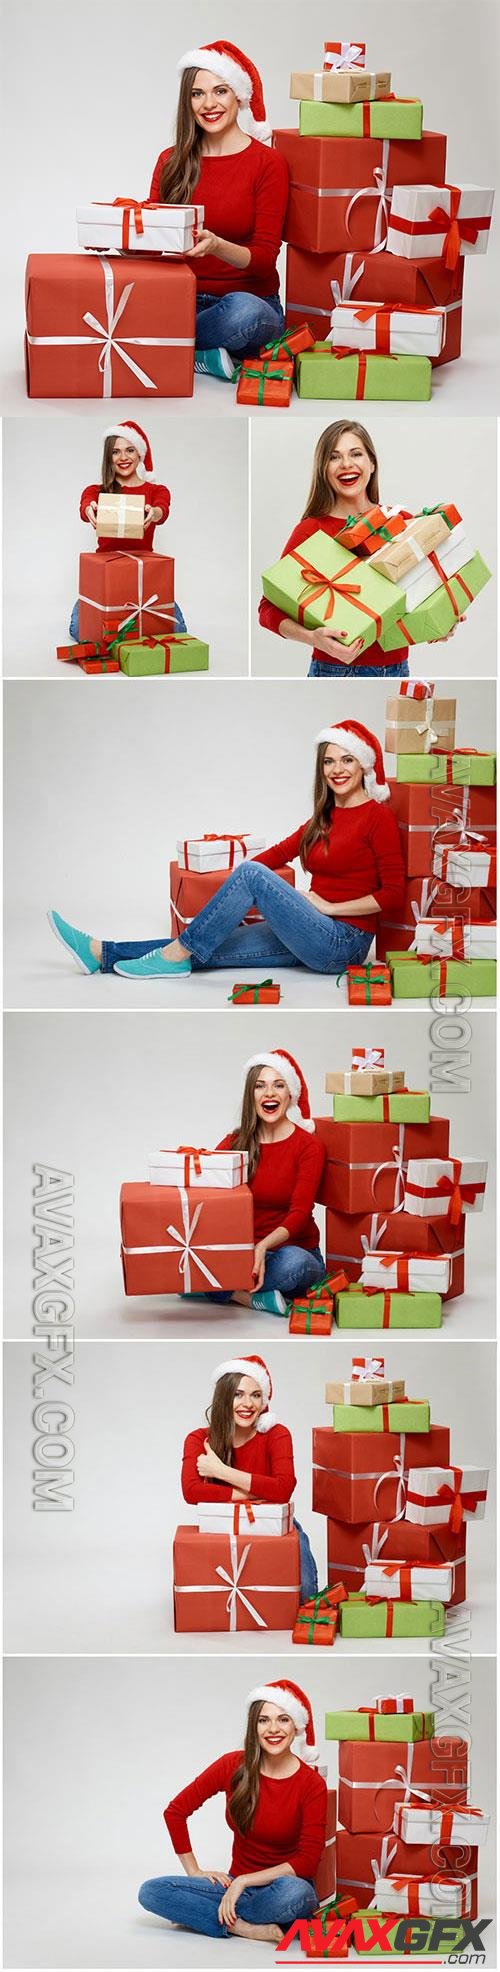 Girl near christmas boxes with gifts stock photo